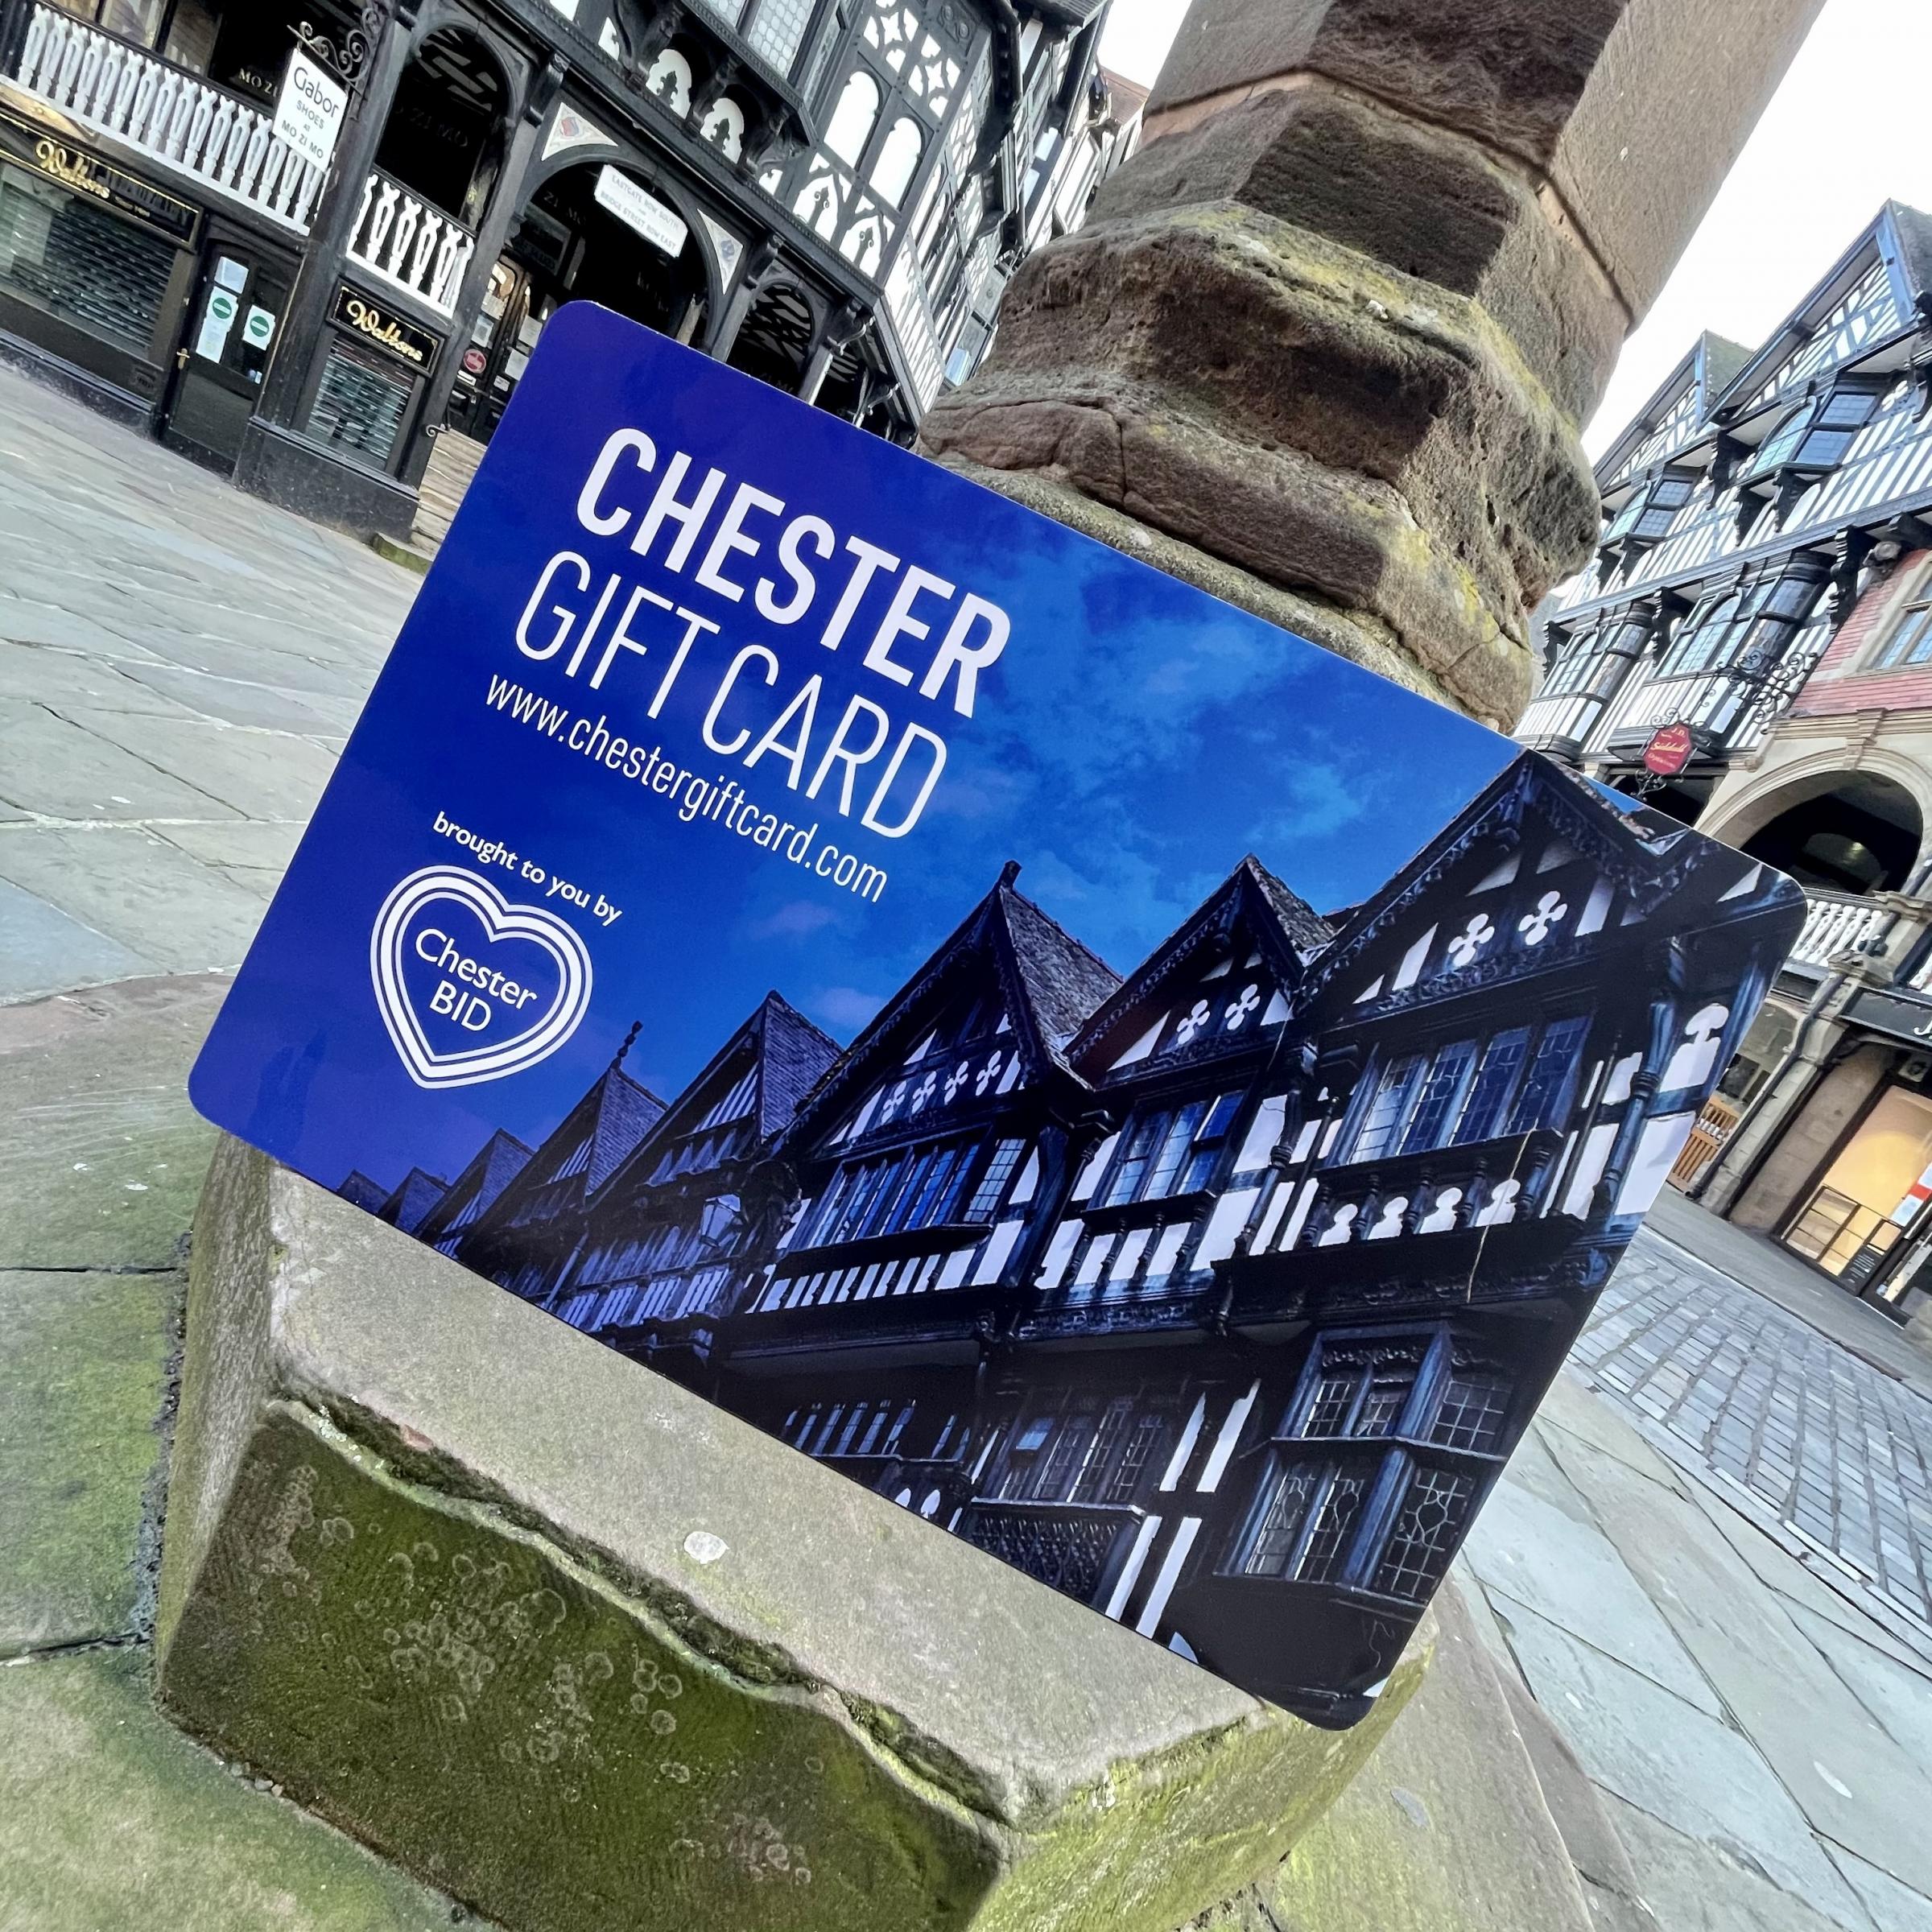 The Chester Gift Card.